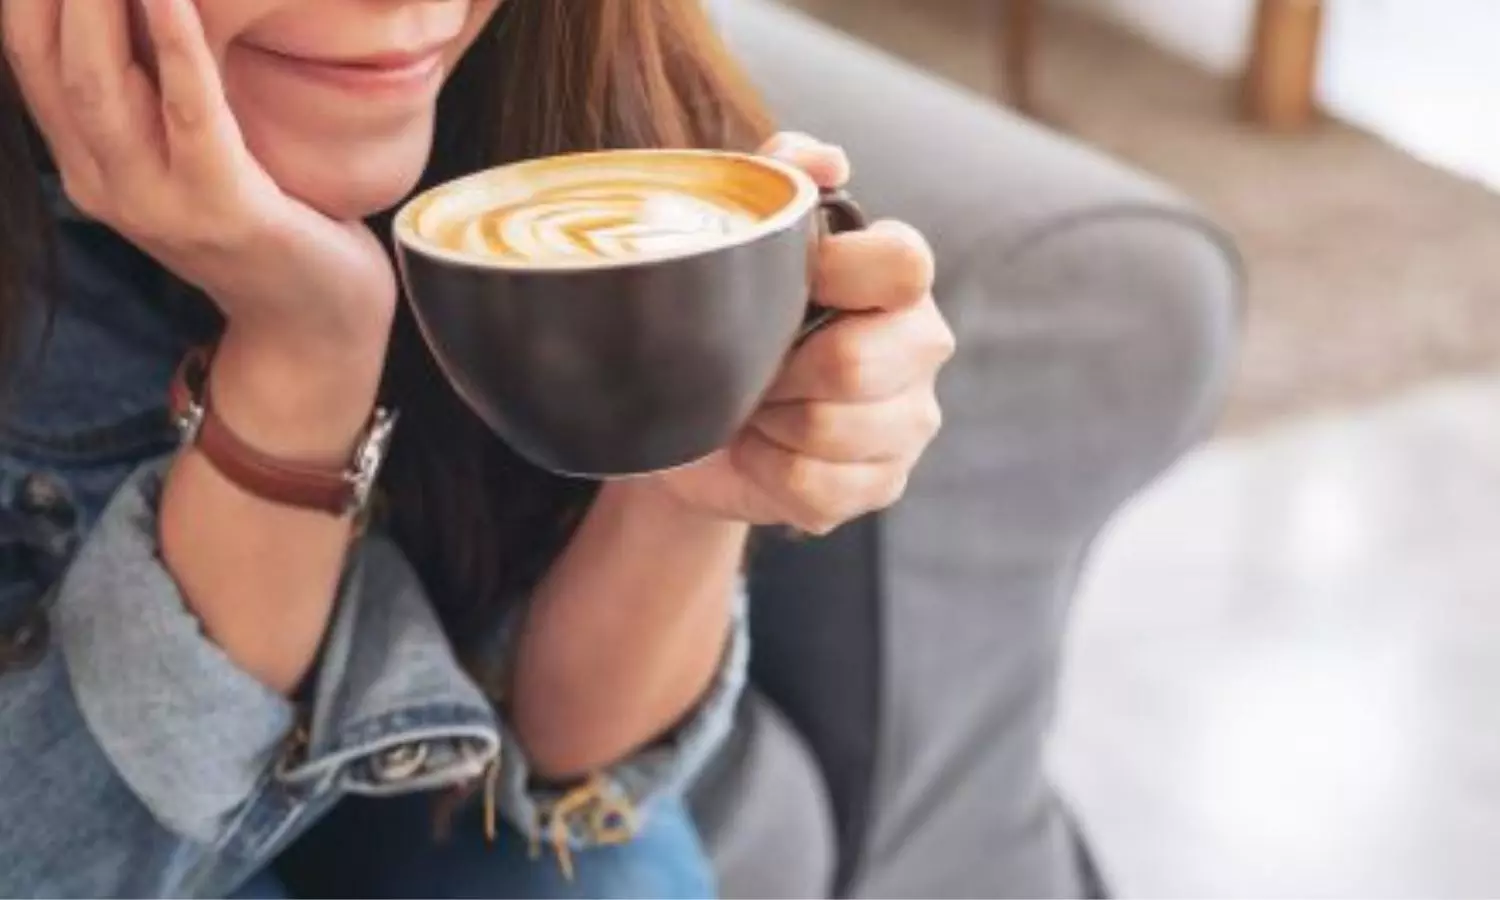 Daily coffee consumption lowers diabetes risk in women with history of gestational diabetes